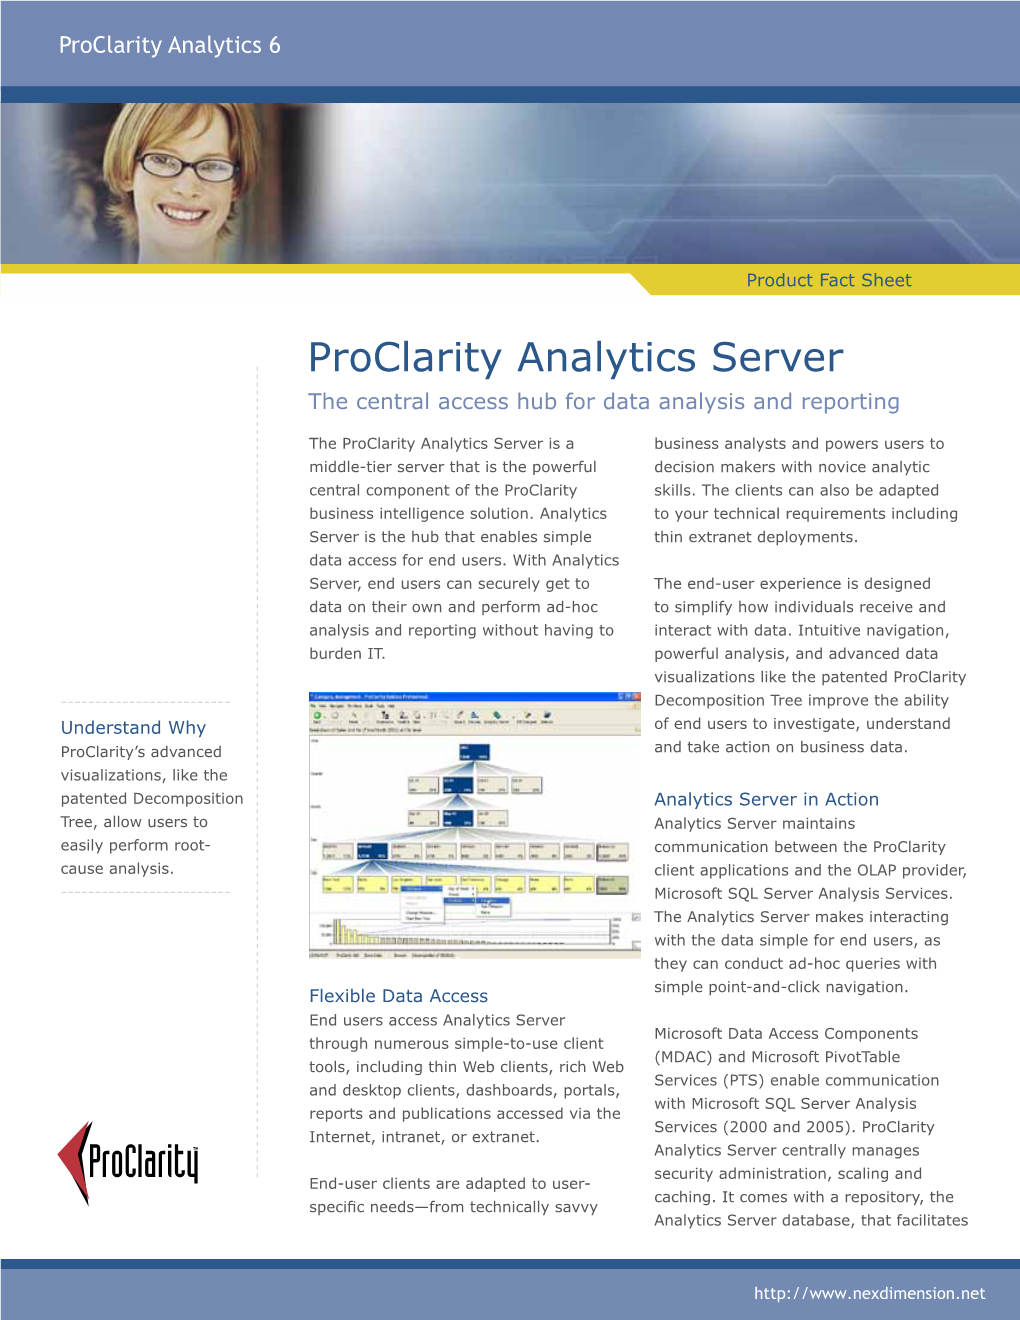 Proclarity Analytics Server the Central Access Hub for Data Analysis and Reporting